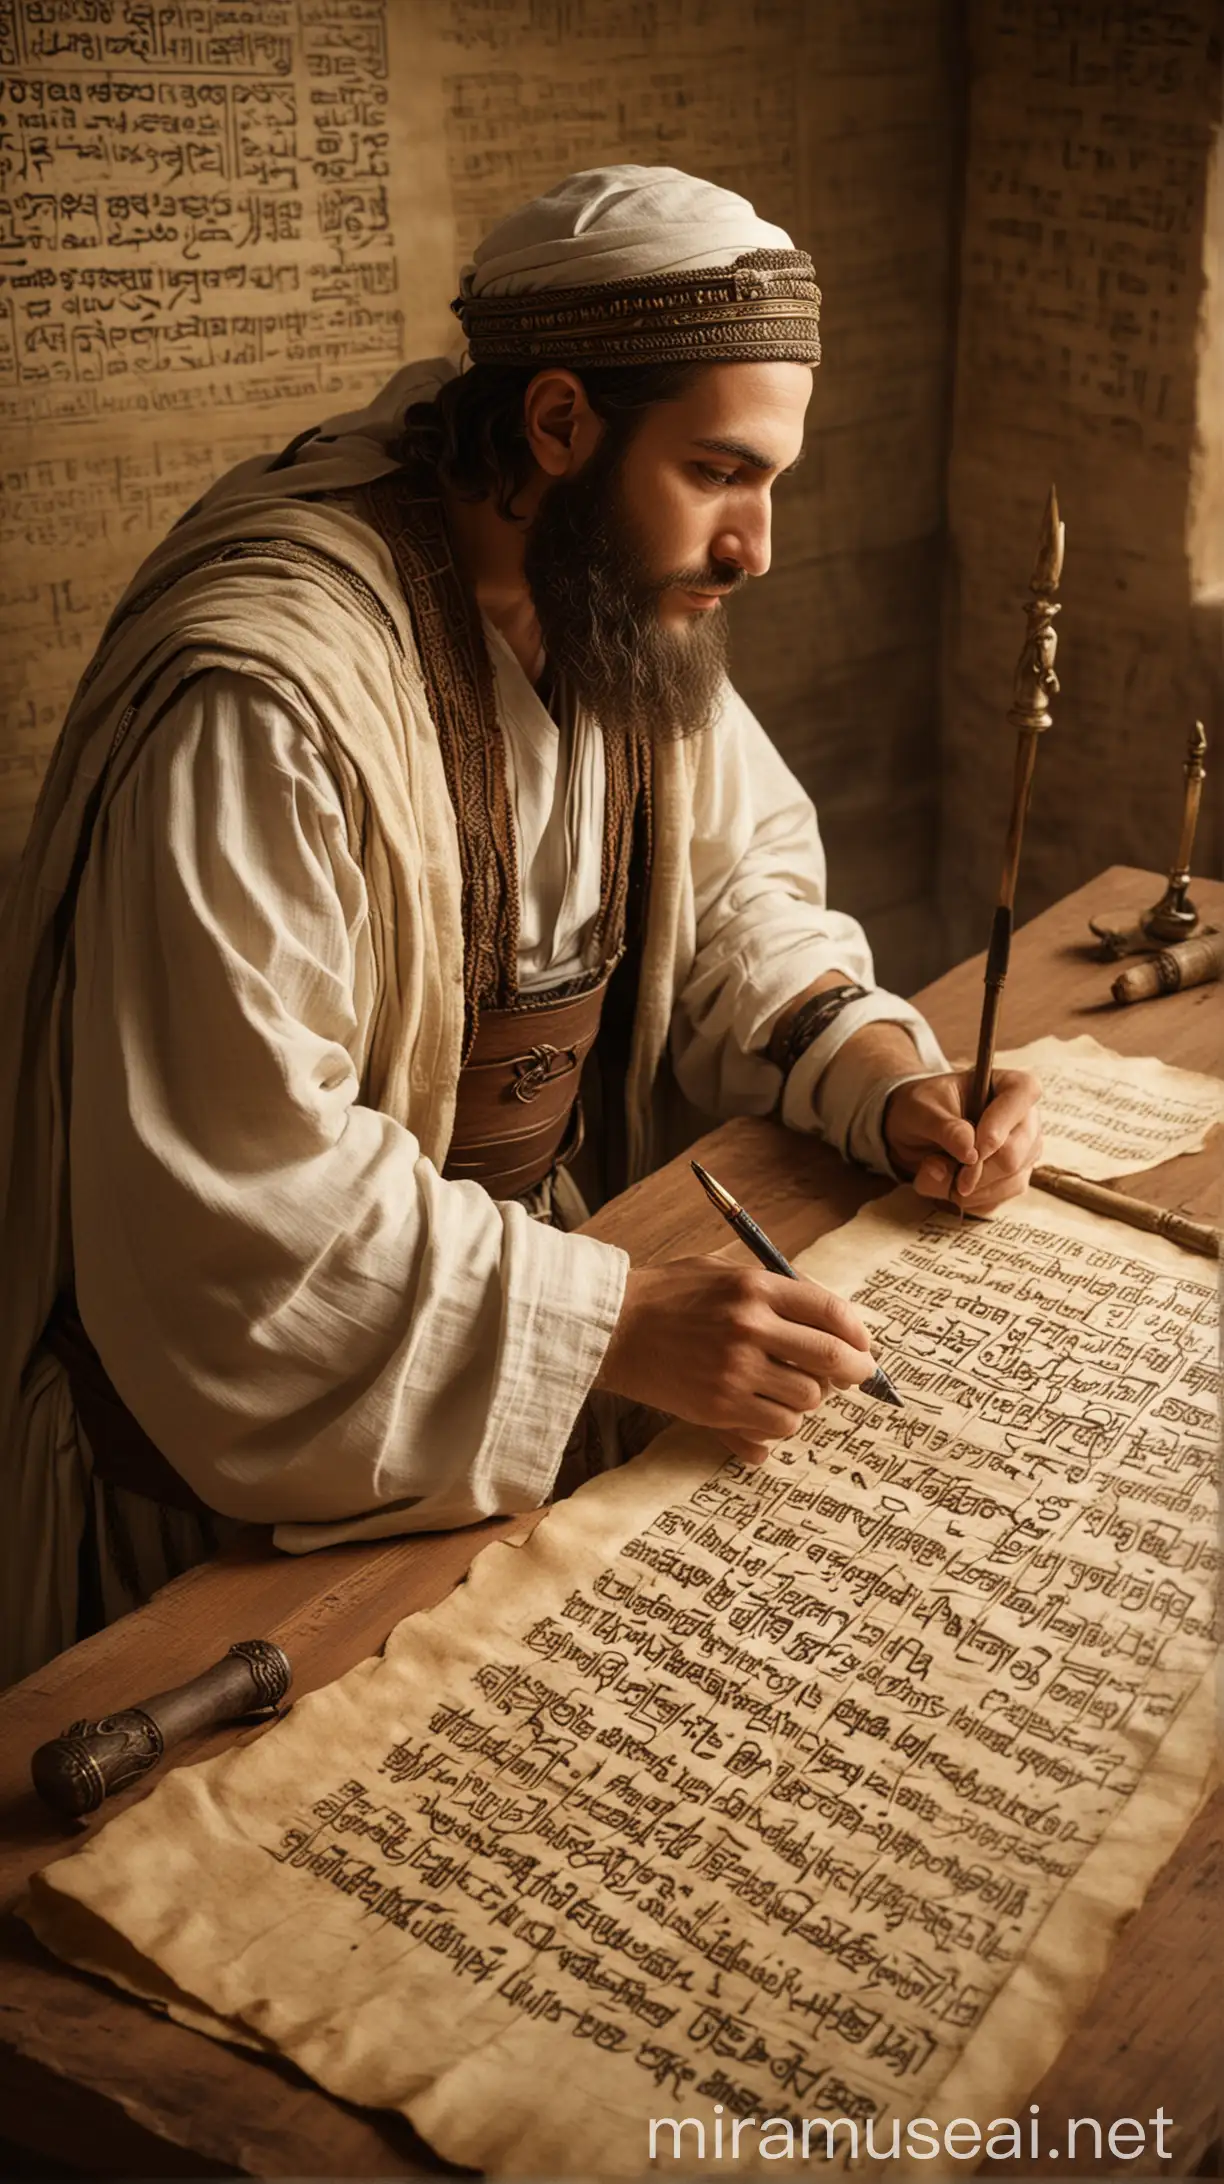 Illustrate a scene from 1 Chronicles 9:4, showing a scribe recording historical events. Include a human figure dressed in traditional ancient Hebrew attire, actively writing on a scroll with a detailed depiction of ancient Hebrew script in the background."In ancient world 